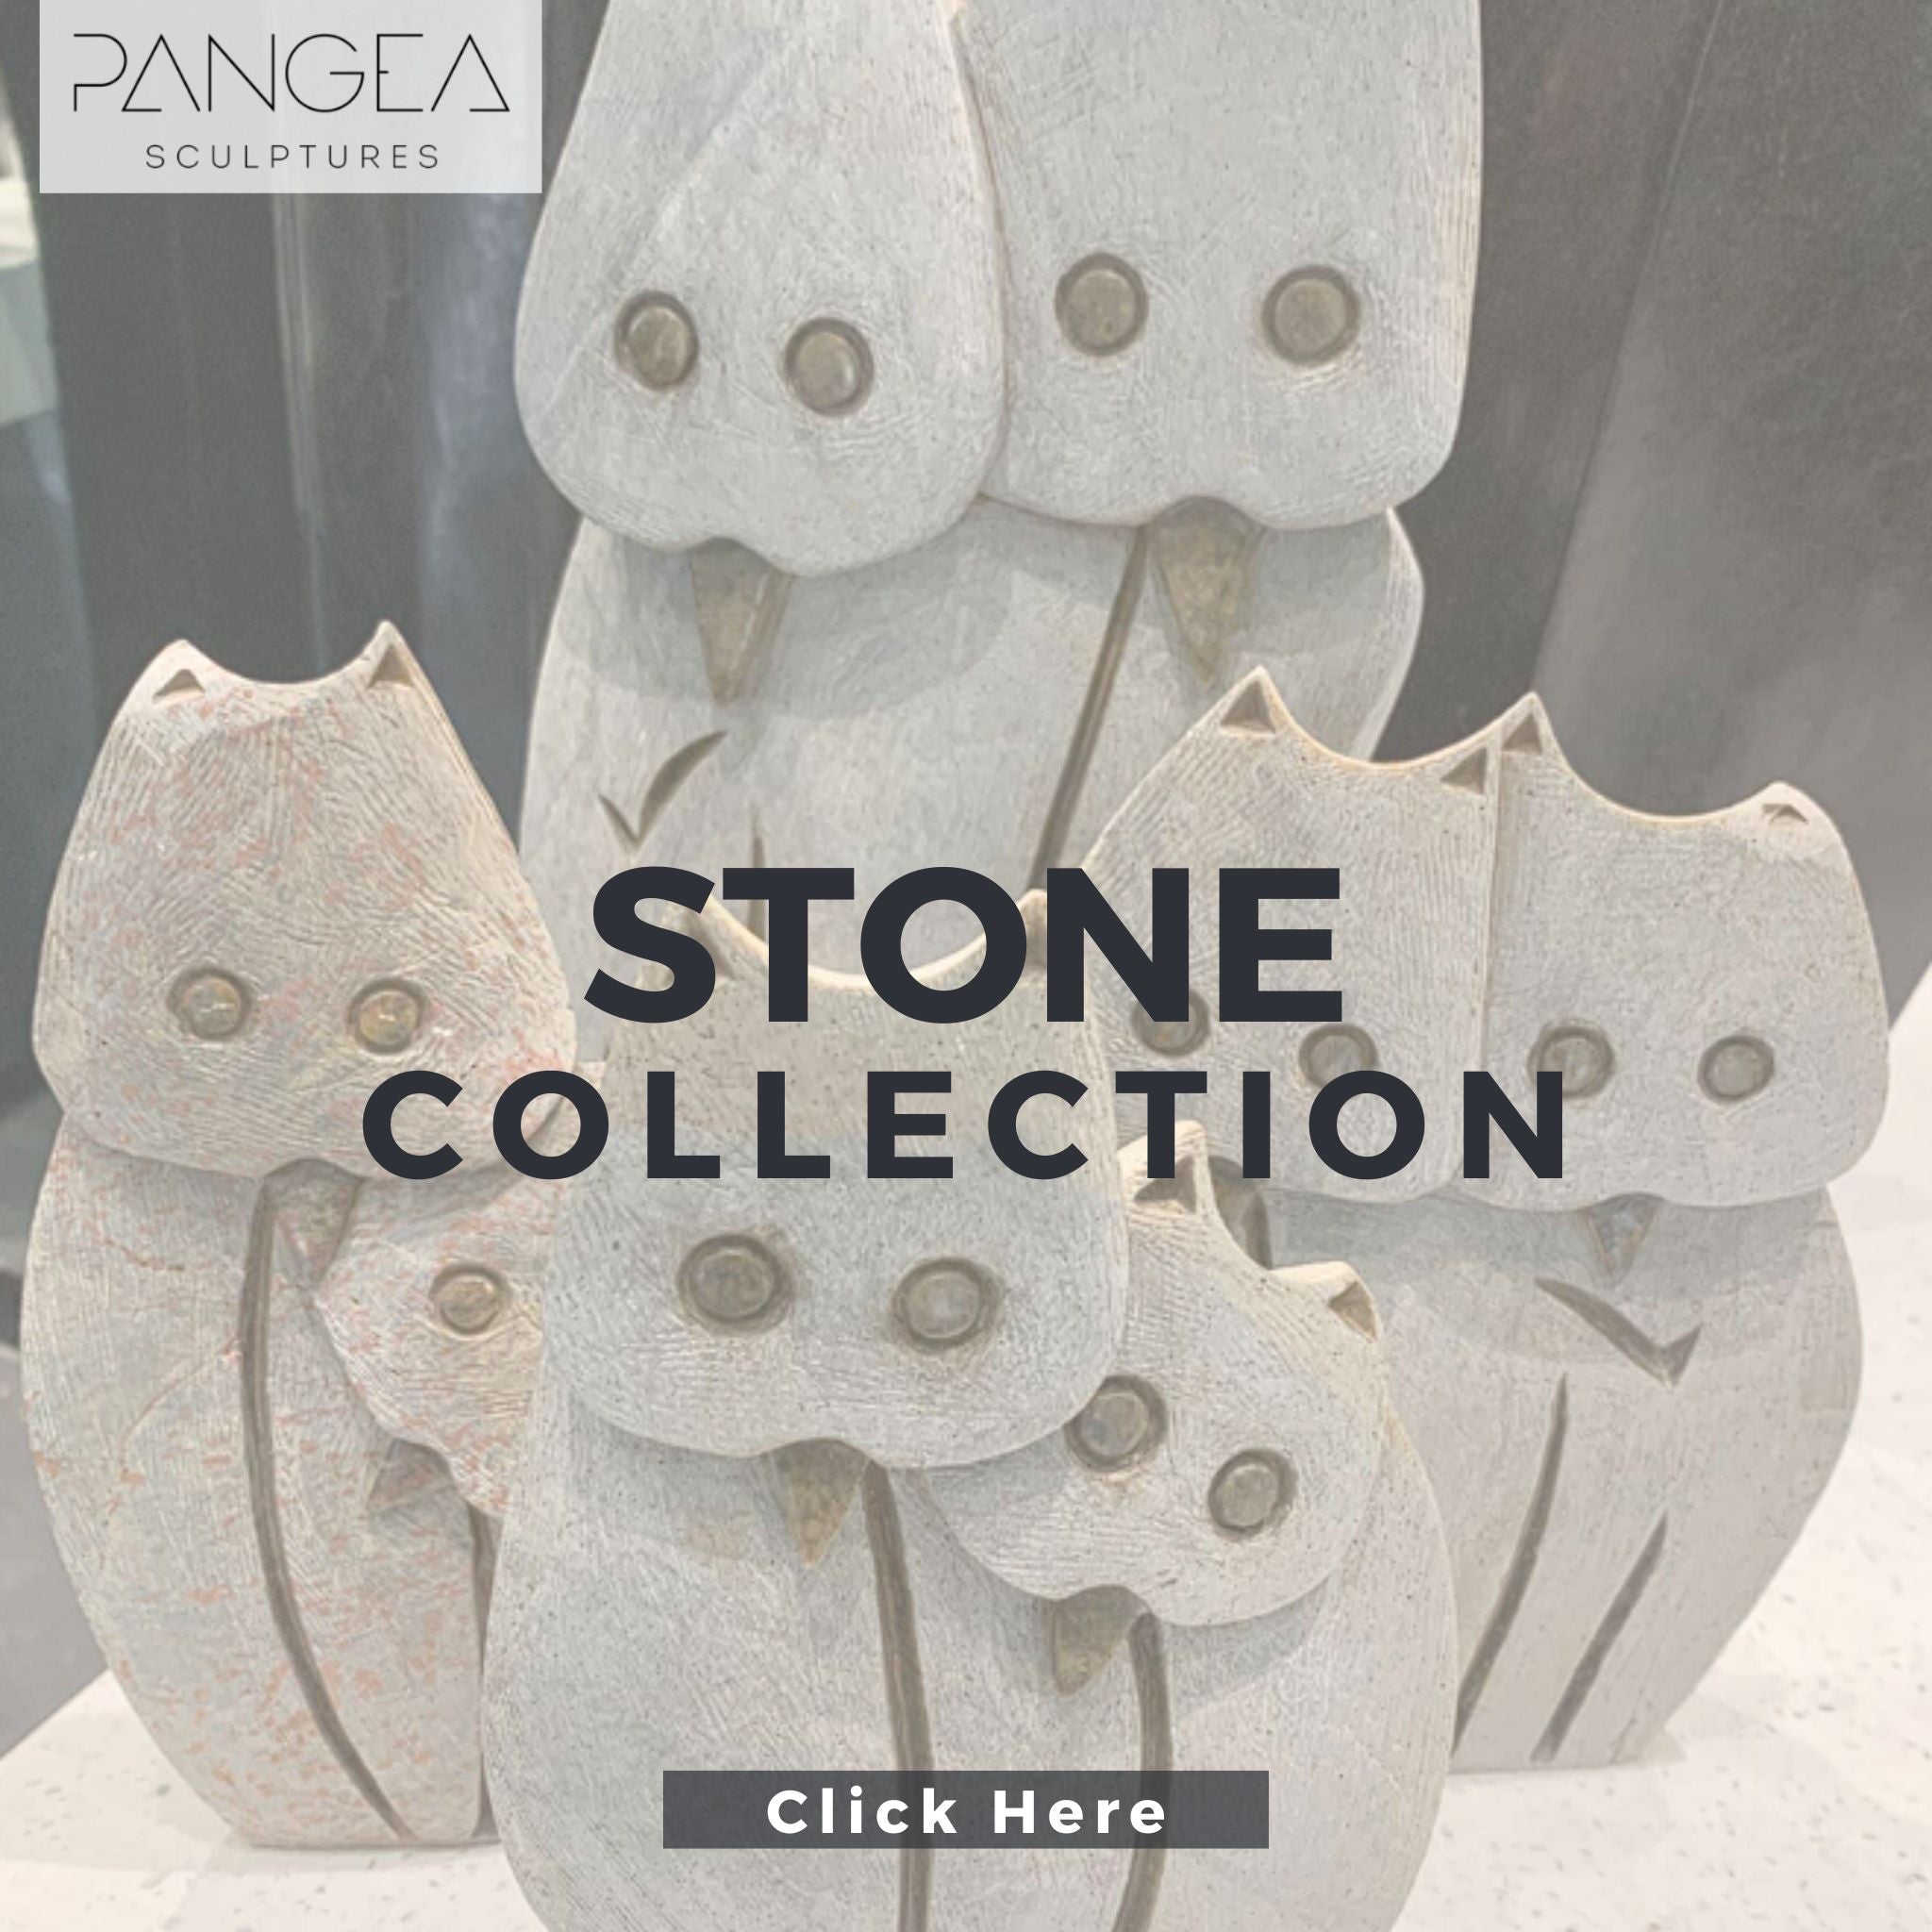 Hand Carved Stone - Pangea Sculptures